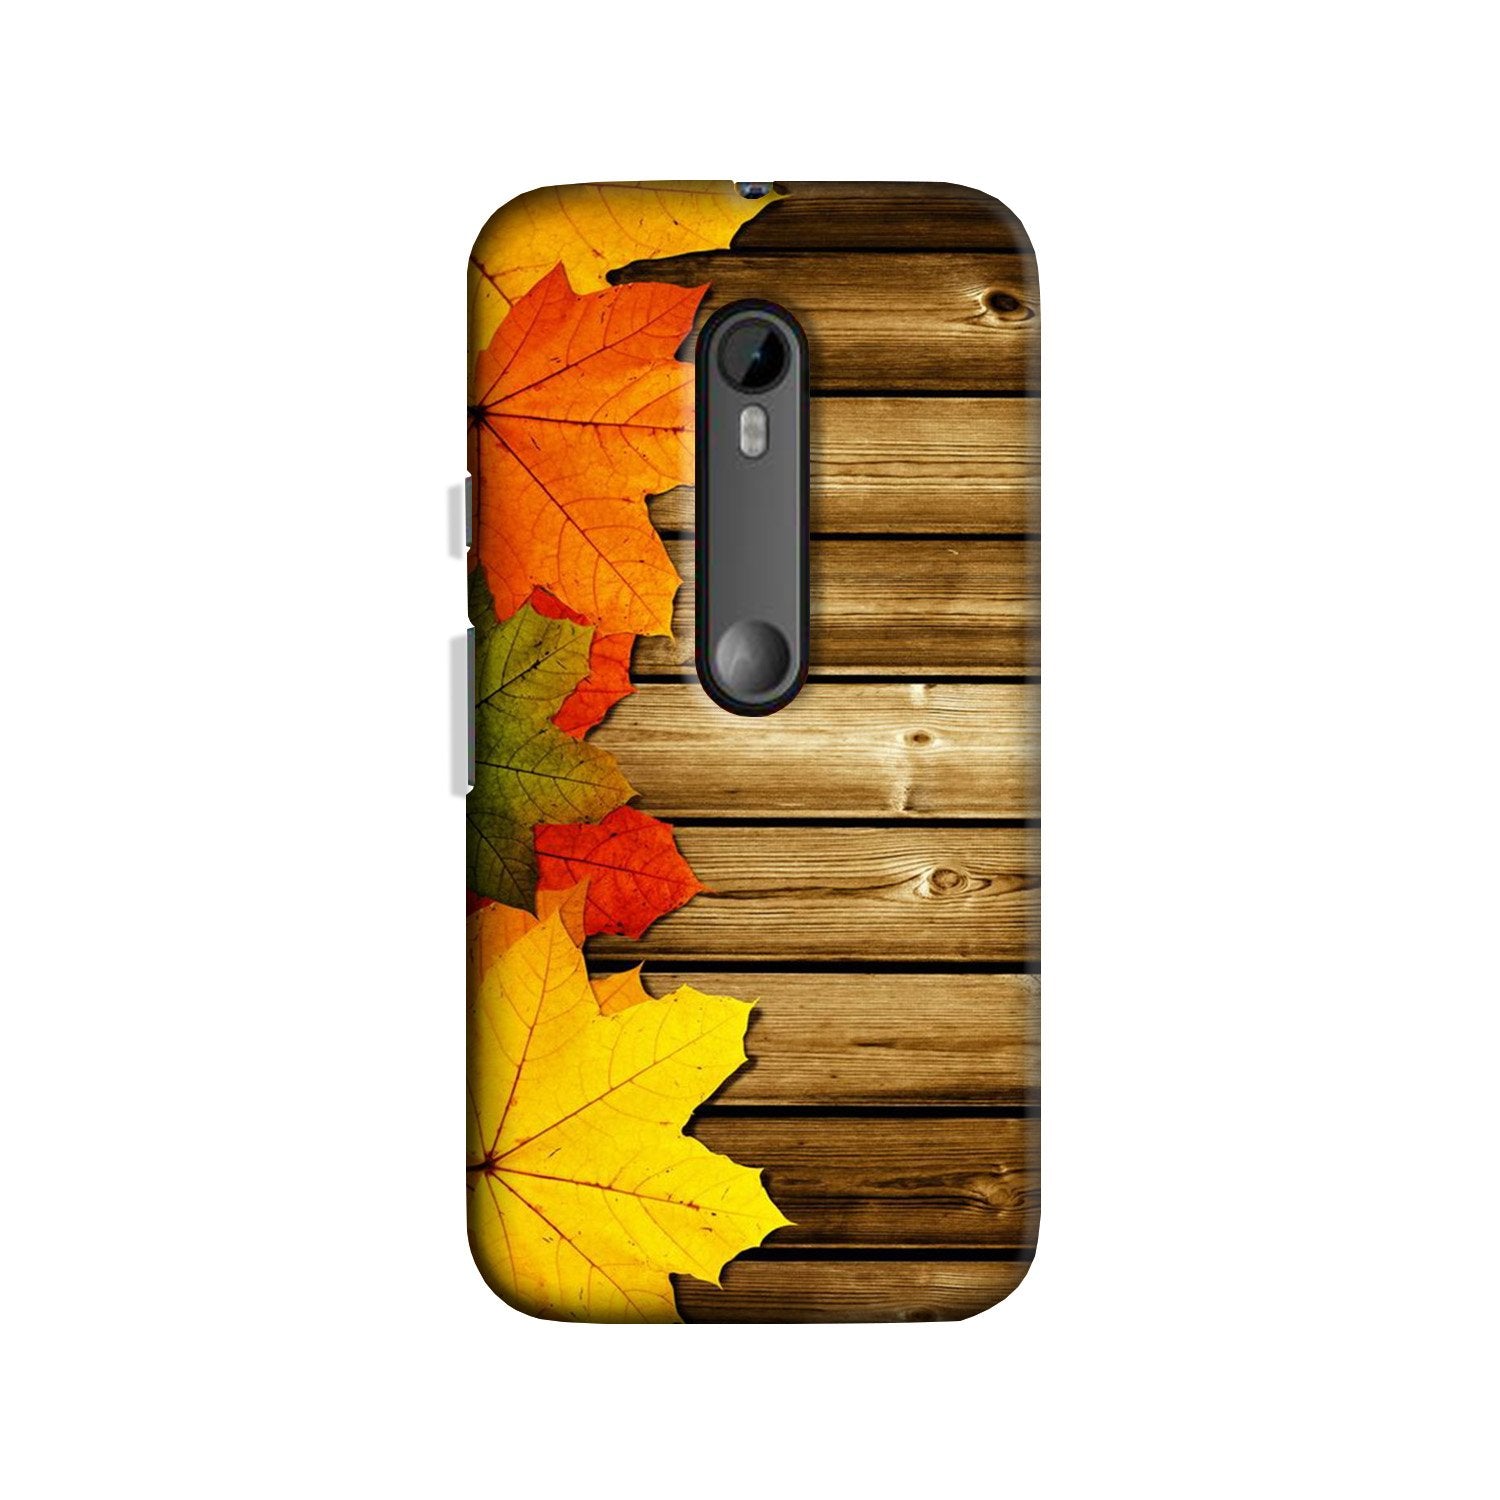 Wooden look3 Case for Moto X Force